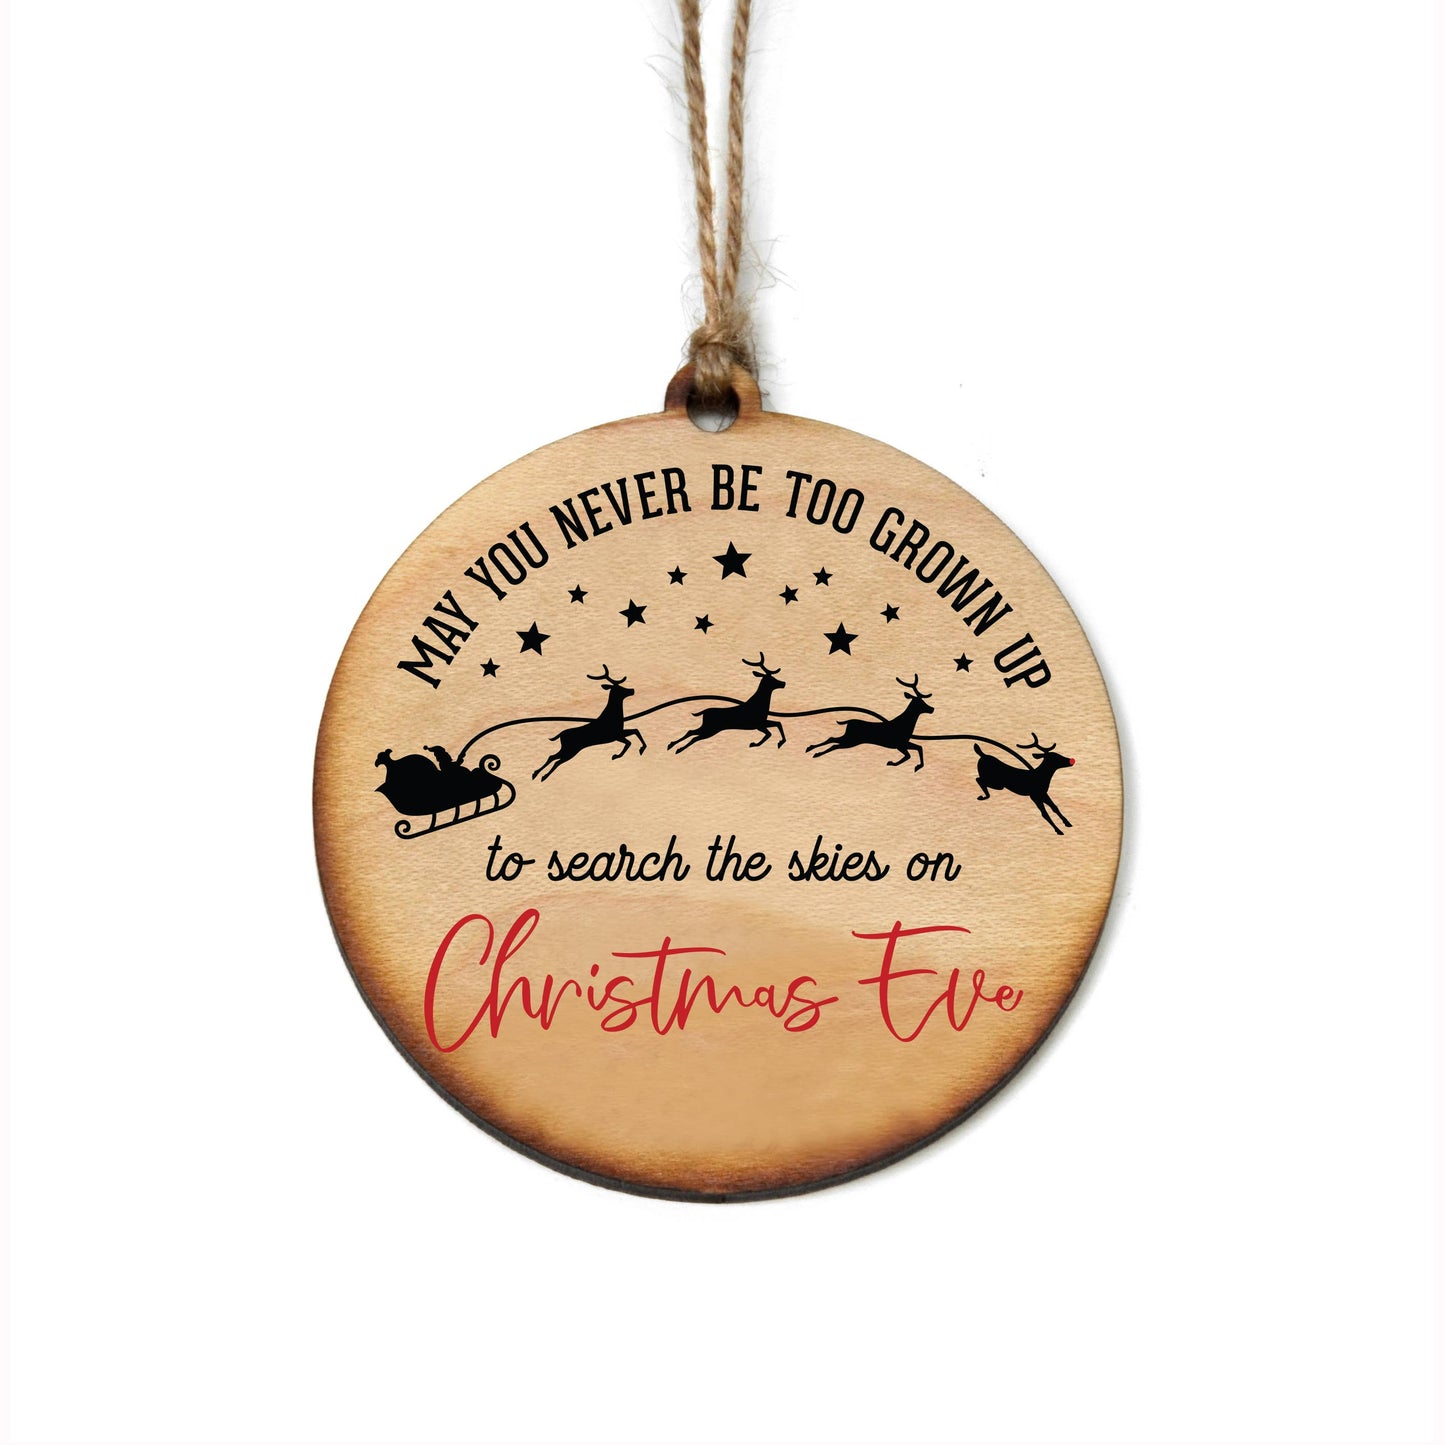 May You Never Be Too Old To Search The Skies on Christmas Eve Wood Ornament